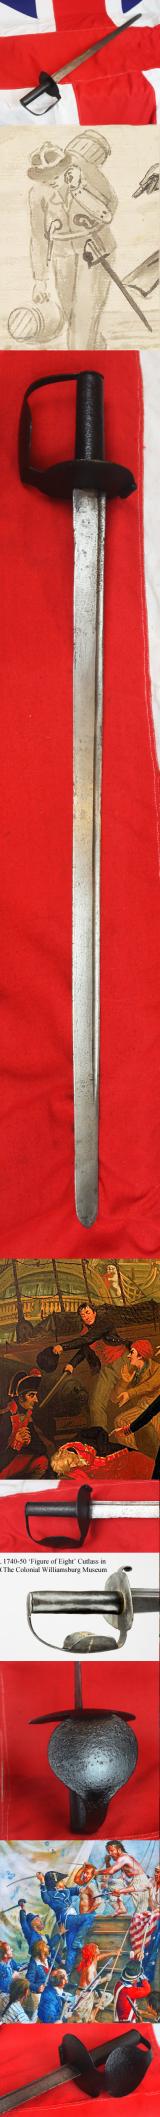 A Most Rare 18th Century Royal Navy Combat Cutlass, with Iron Double Disc {Figure of Eight} Hilt and Tubular Steel Grip. With Straight Back-Sword Blade With Single Fuller. Designed by Thomas Hollier in the Early 18th Century